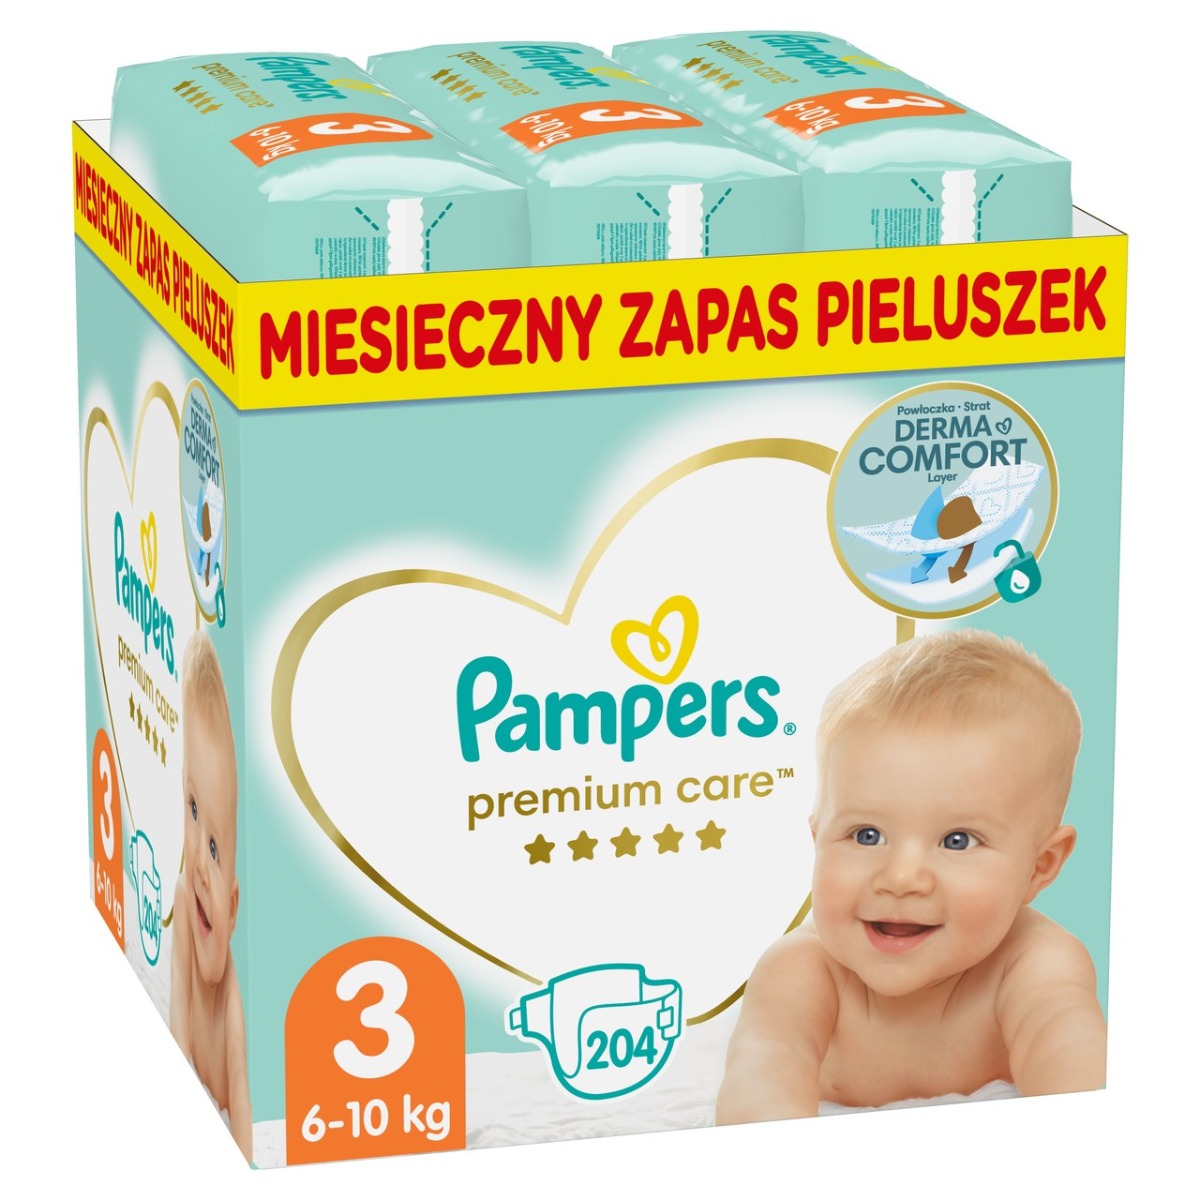 pampers sllp&play